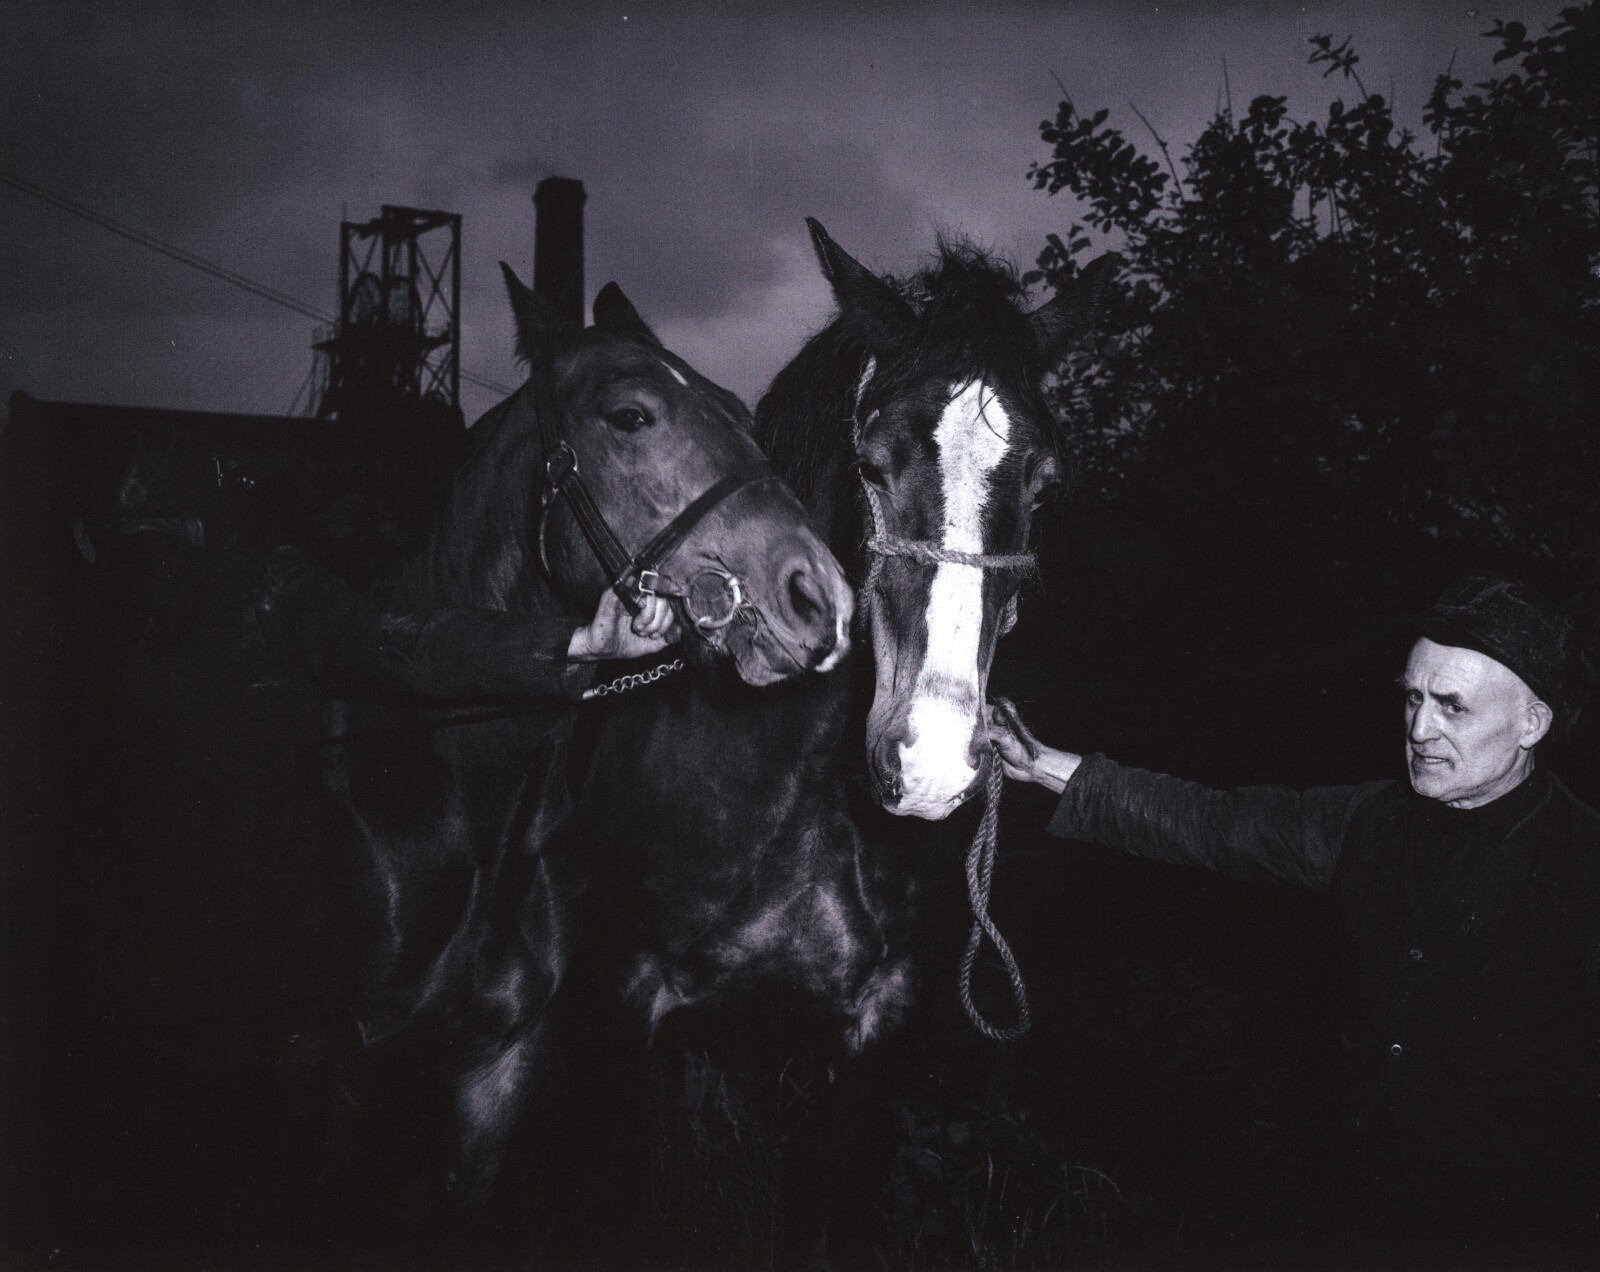 Two men hold the reins of two hourses. It’s night-time but the big pit wheel can be seen in the background; the man has a serious look on his face